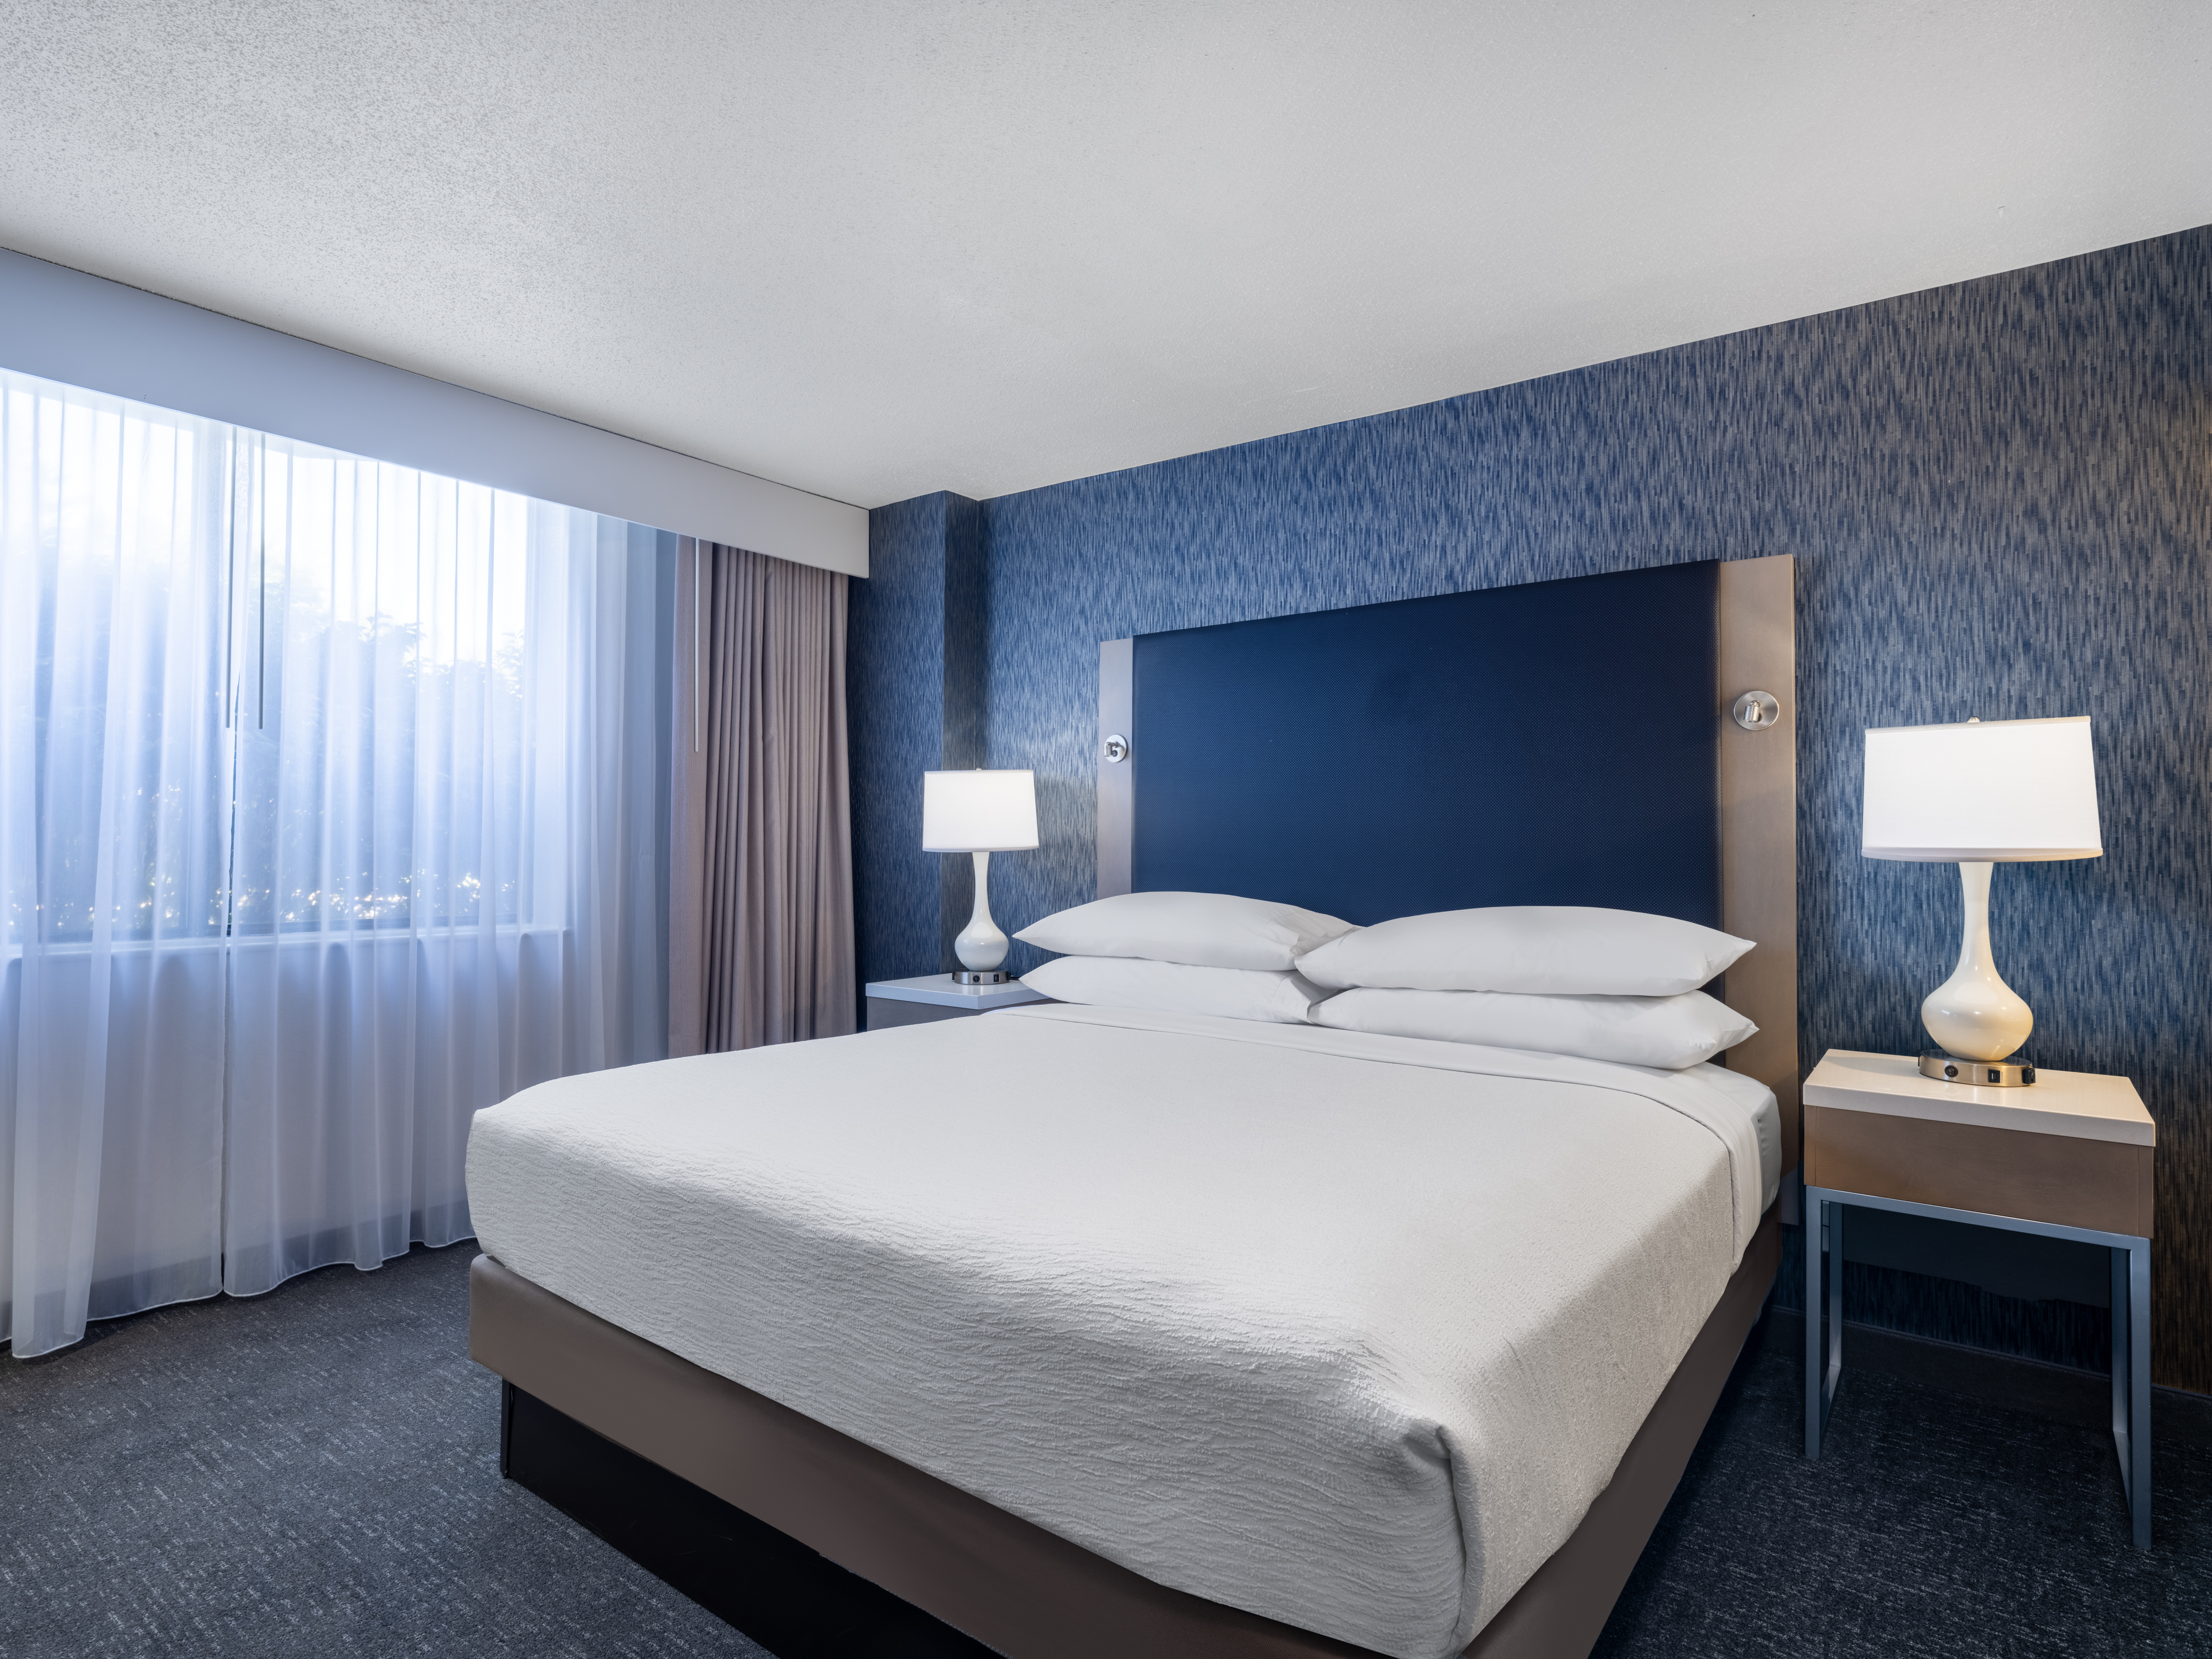 Accessible rooms are designed to meet ADA requirements.